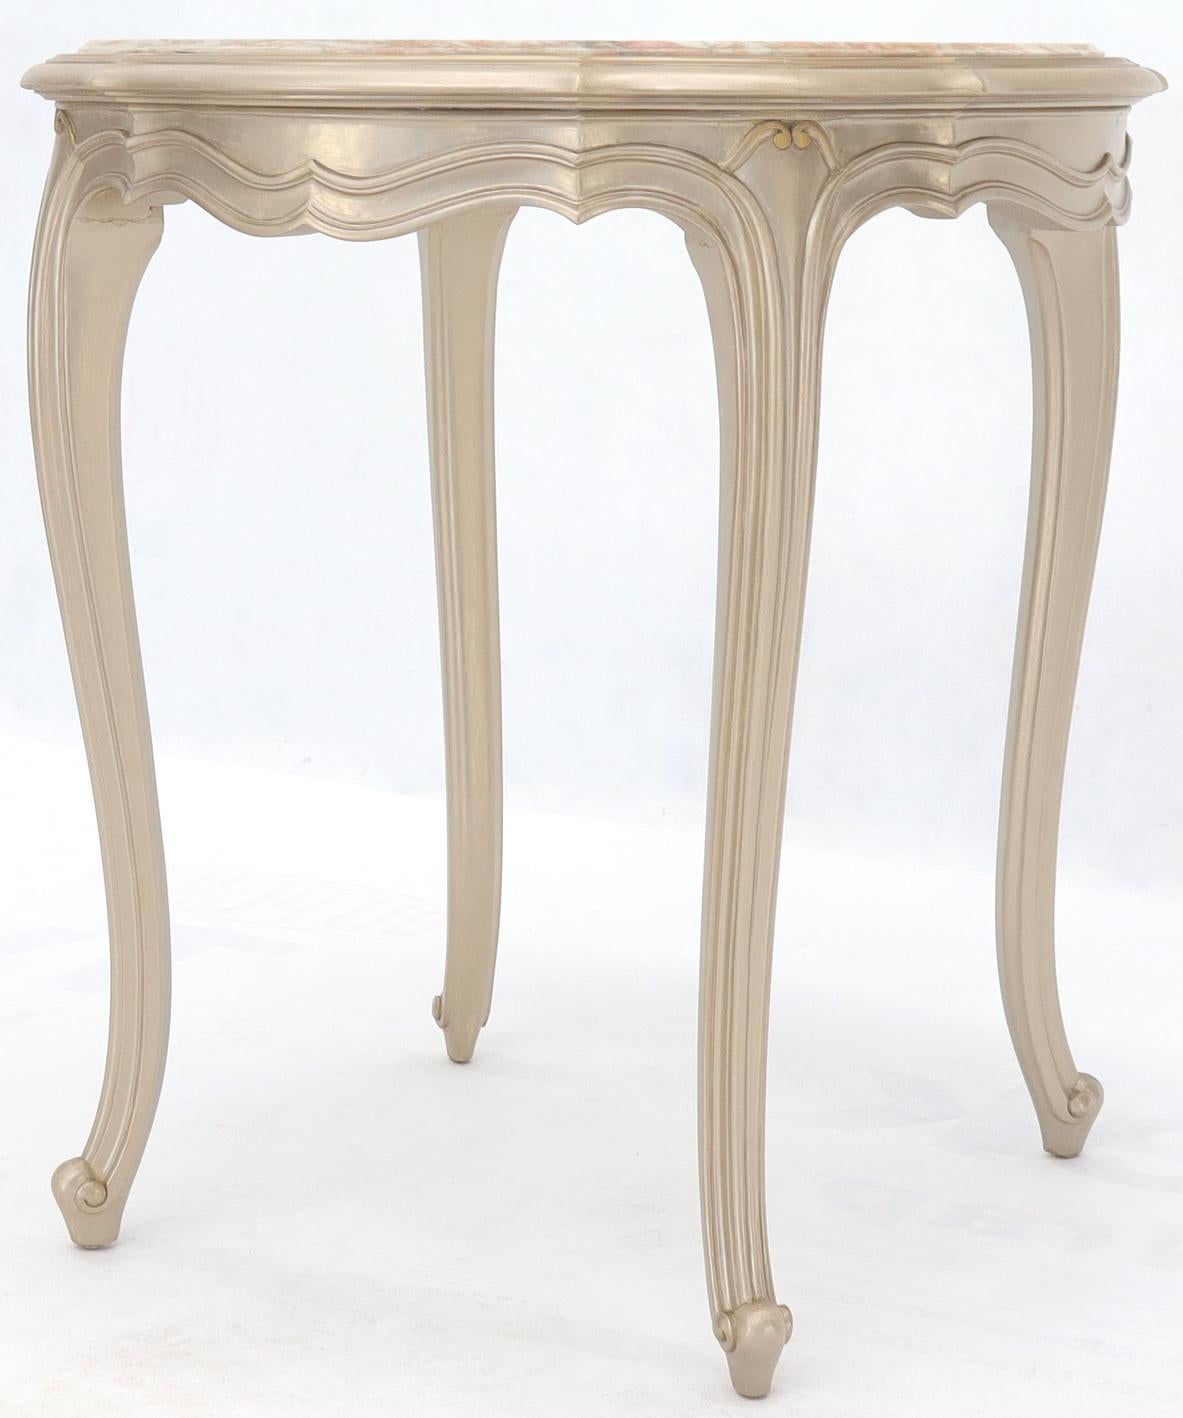 Painted Country Provincial Tall Legs Silver Gilt Marble-Top Lamp Table Stand For Sale